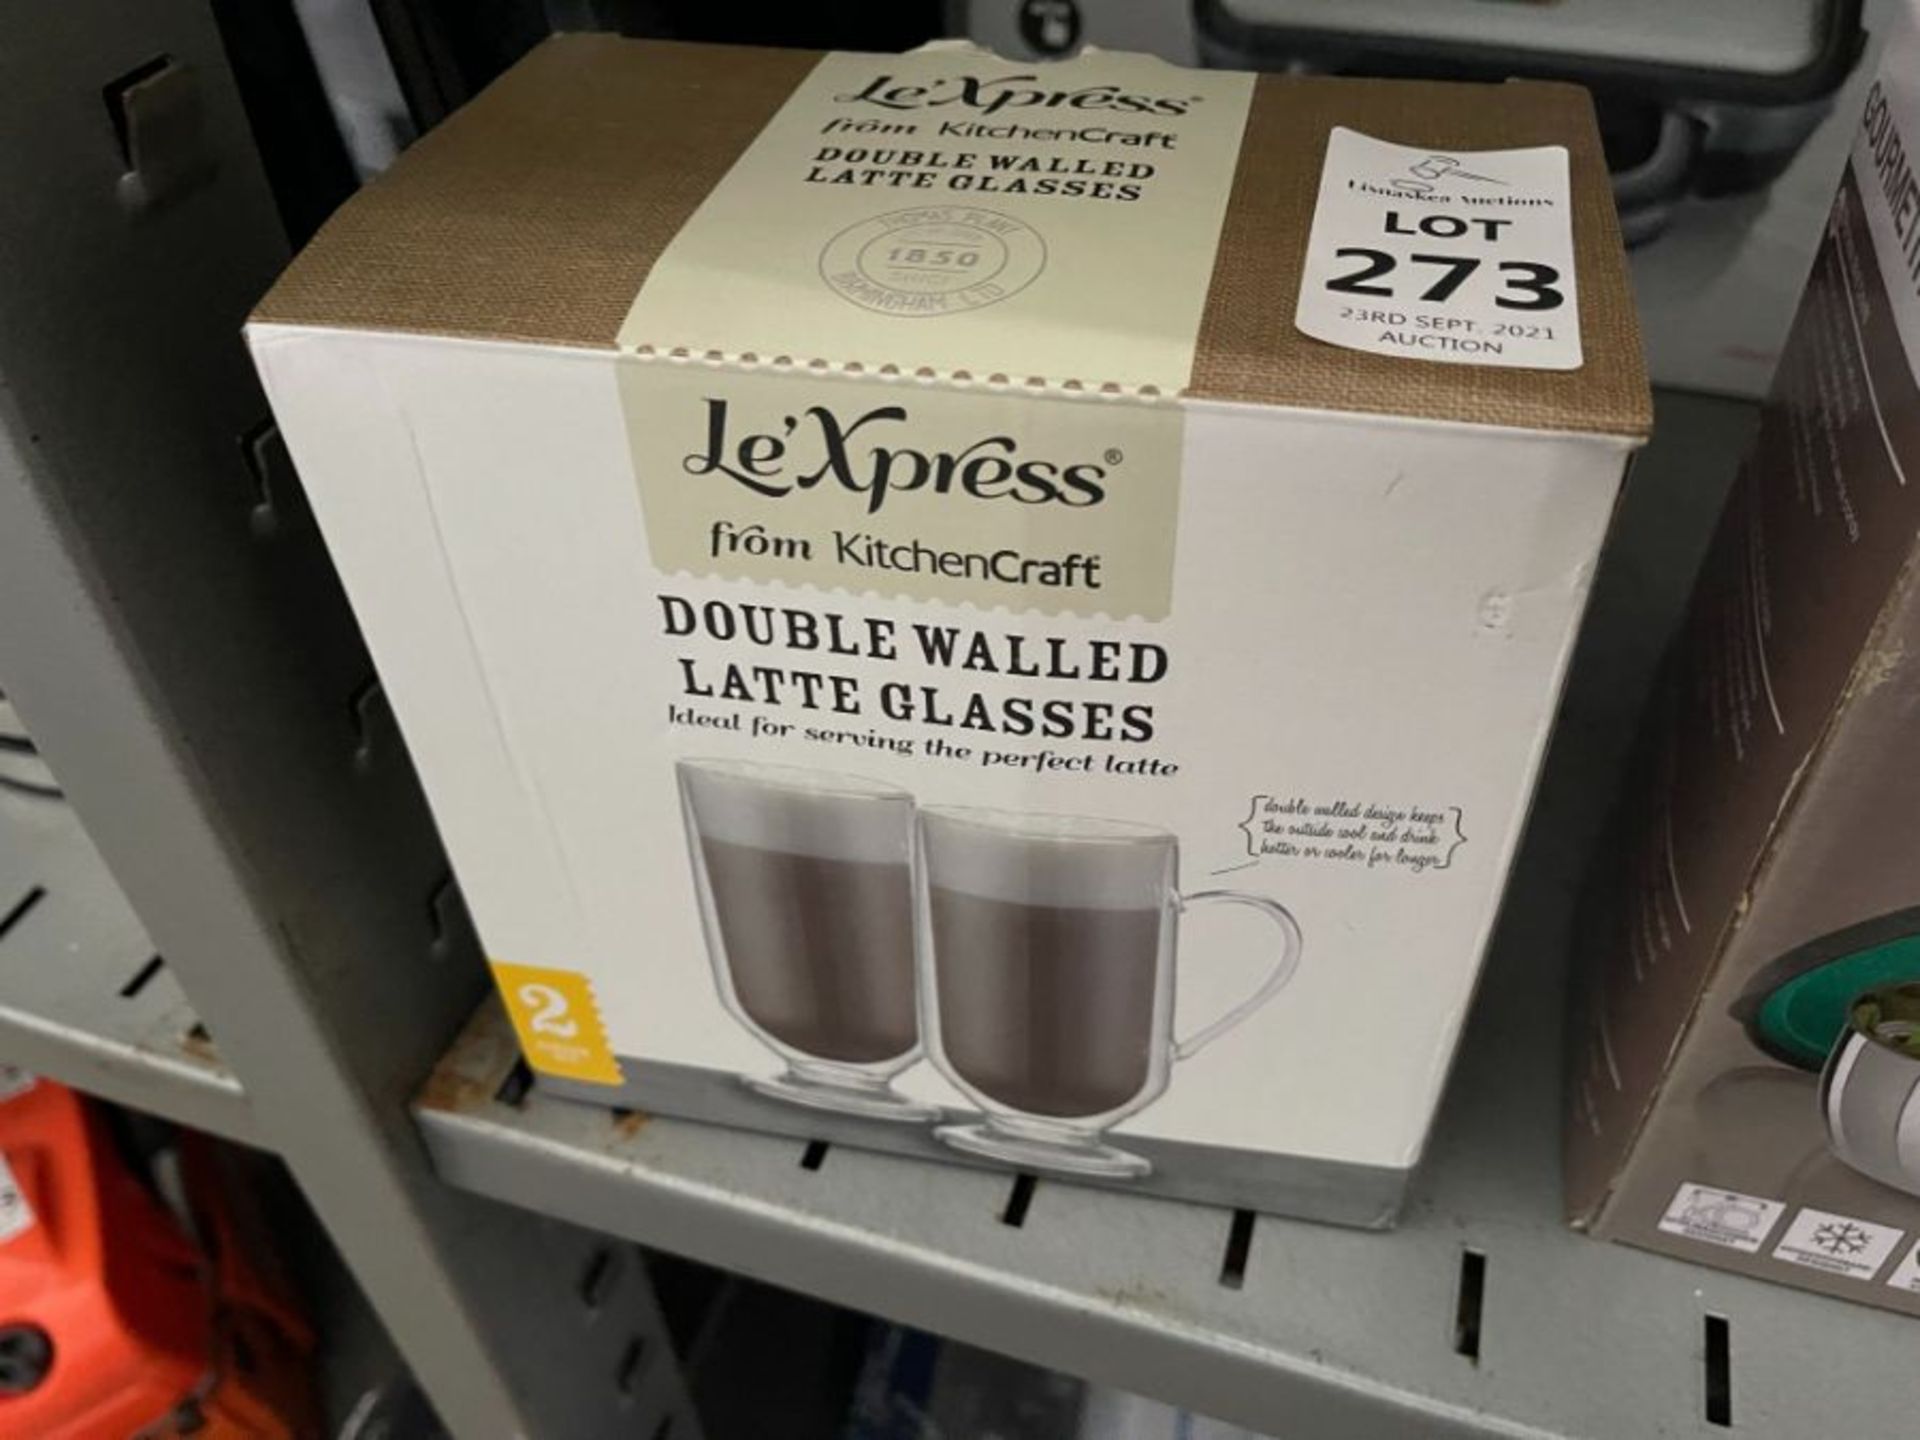 LE'XPRESS FROM KITCHENCRAFT DOUBLE WALLED LATTE GLASSES